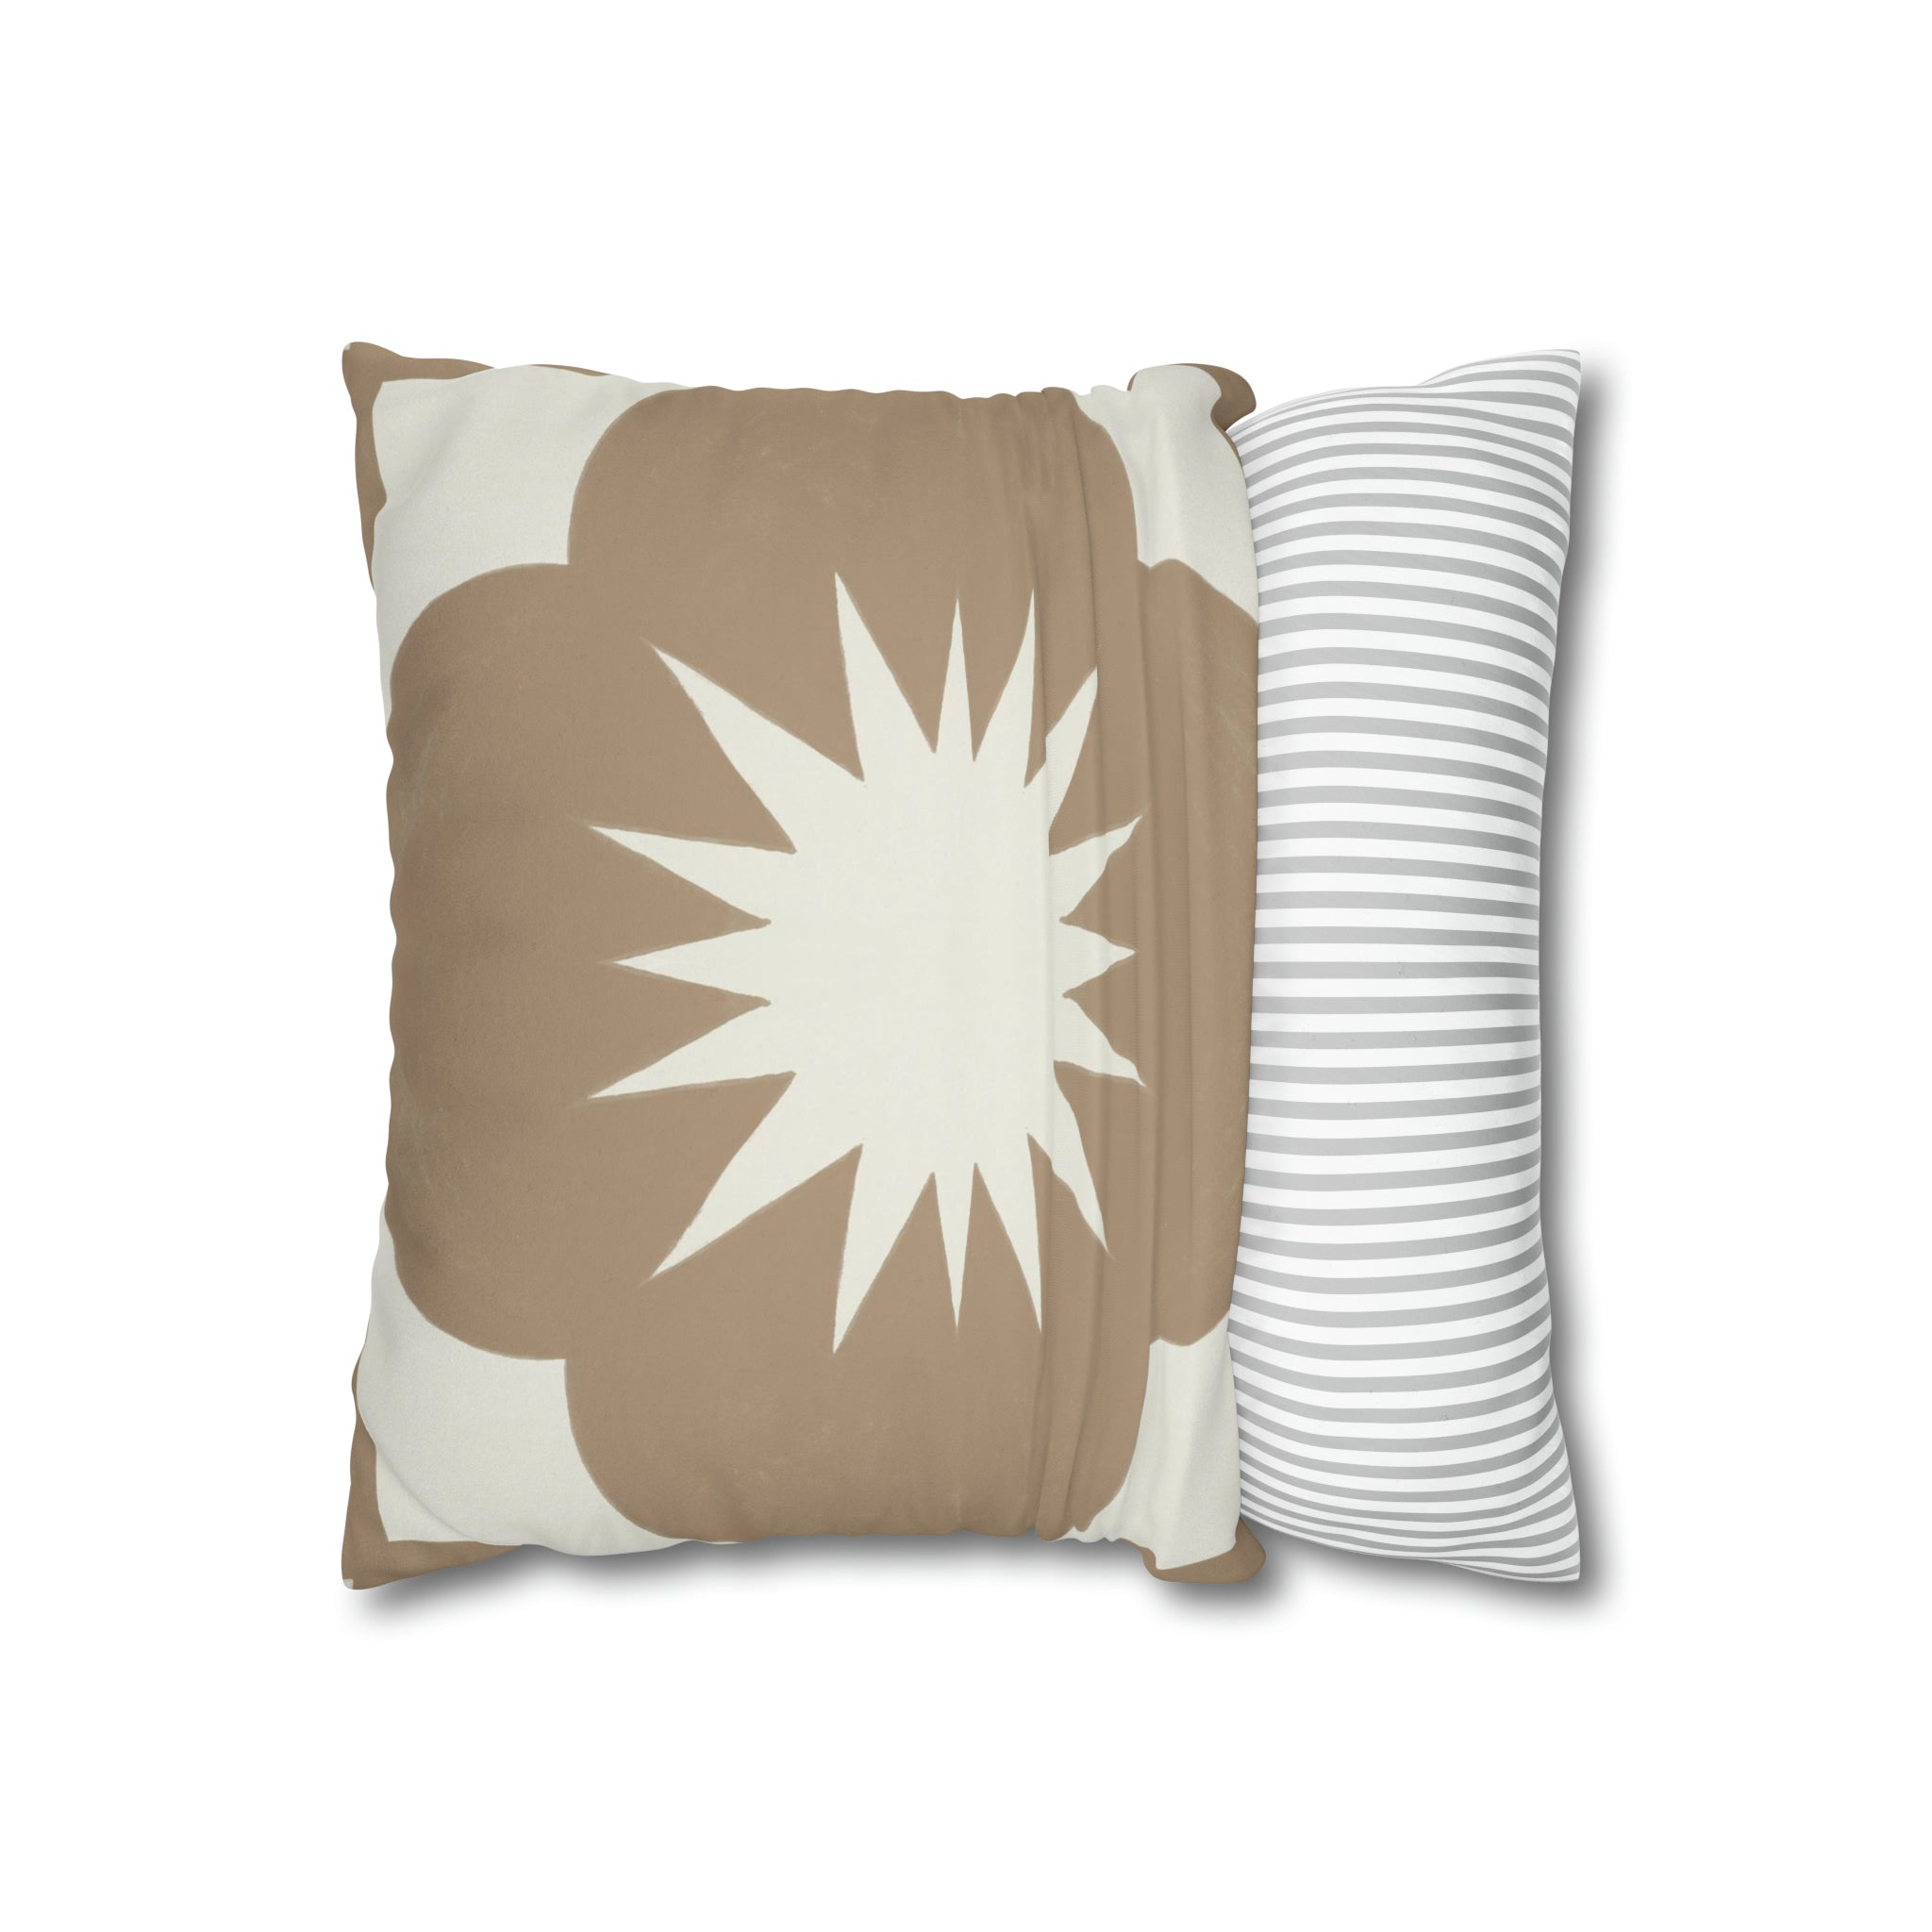 a brown and white pillow sitting next to a white and brown pillow